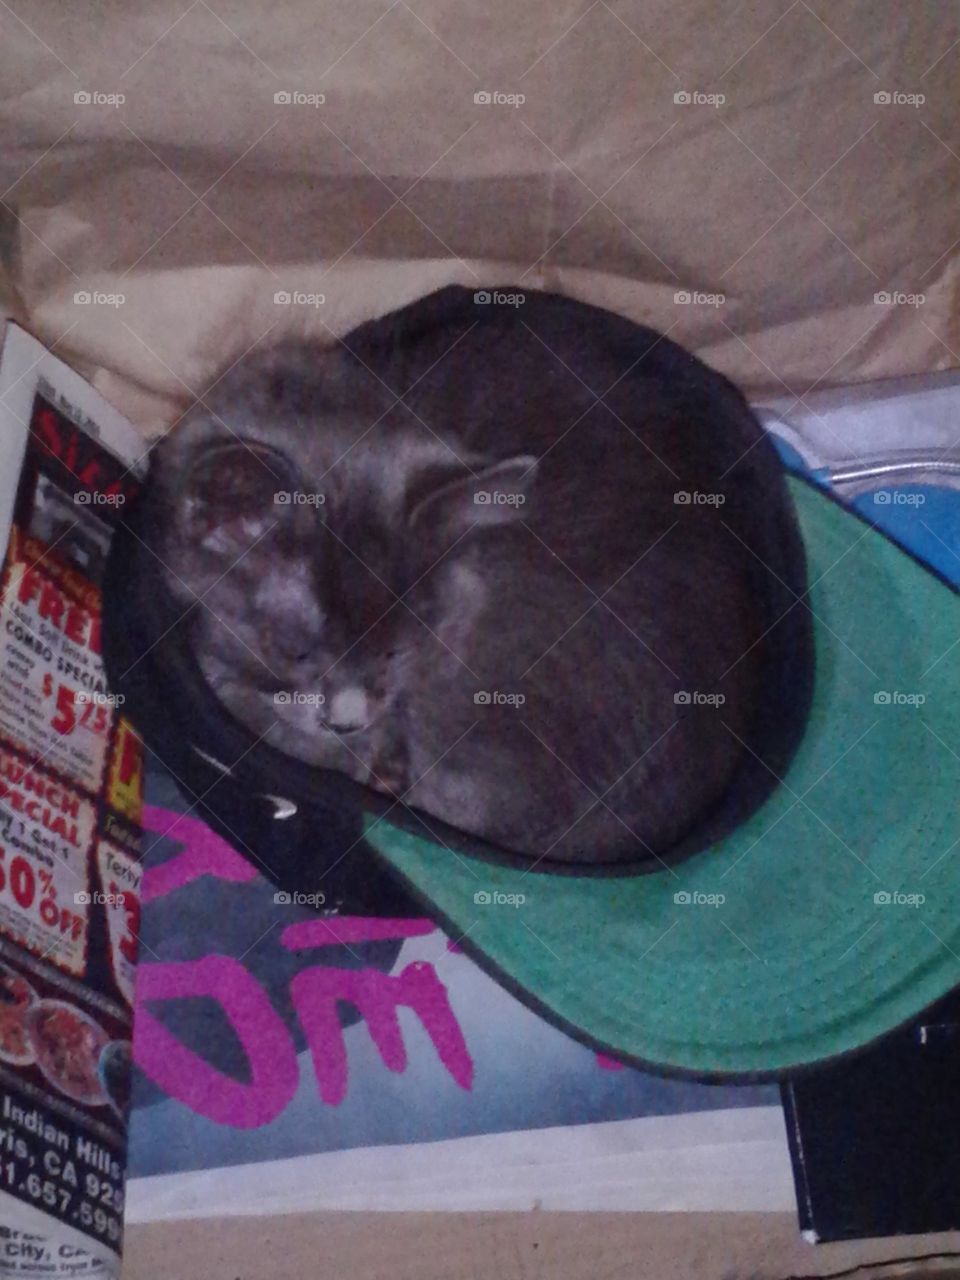 that cat in the hat. perfect fit...sleep tight